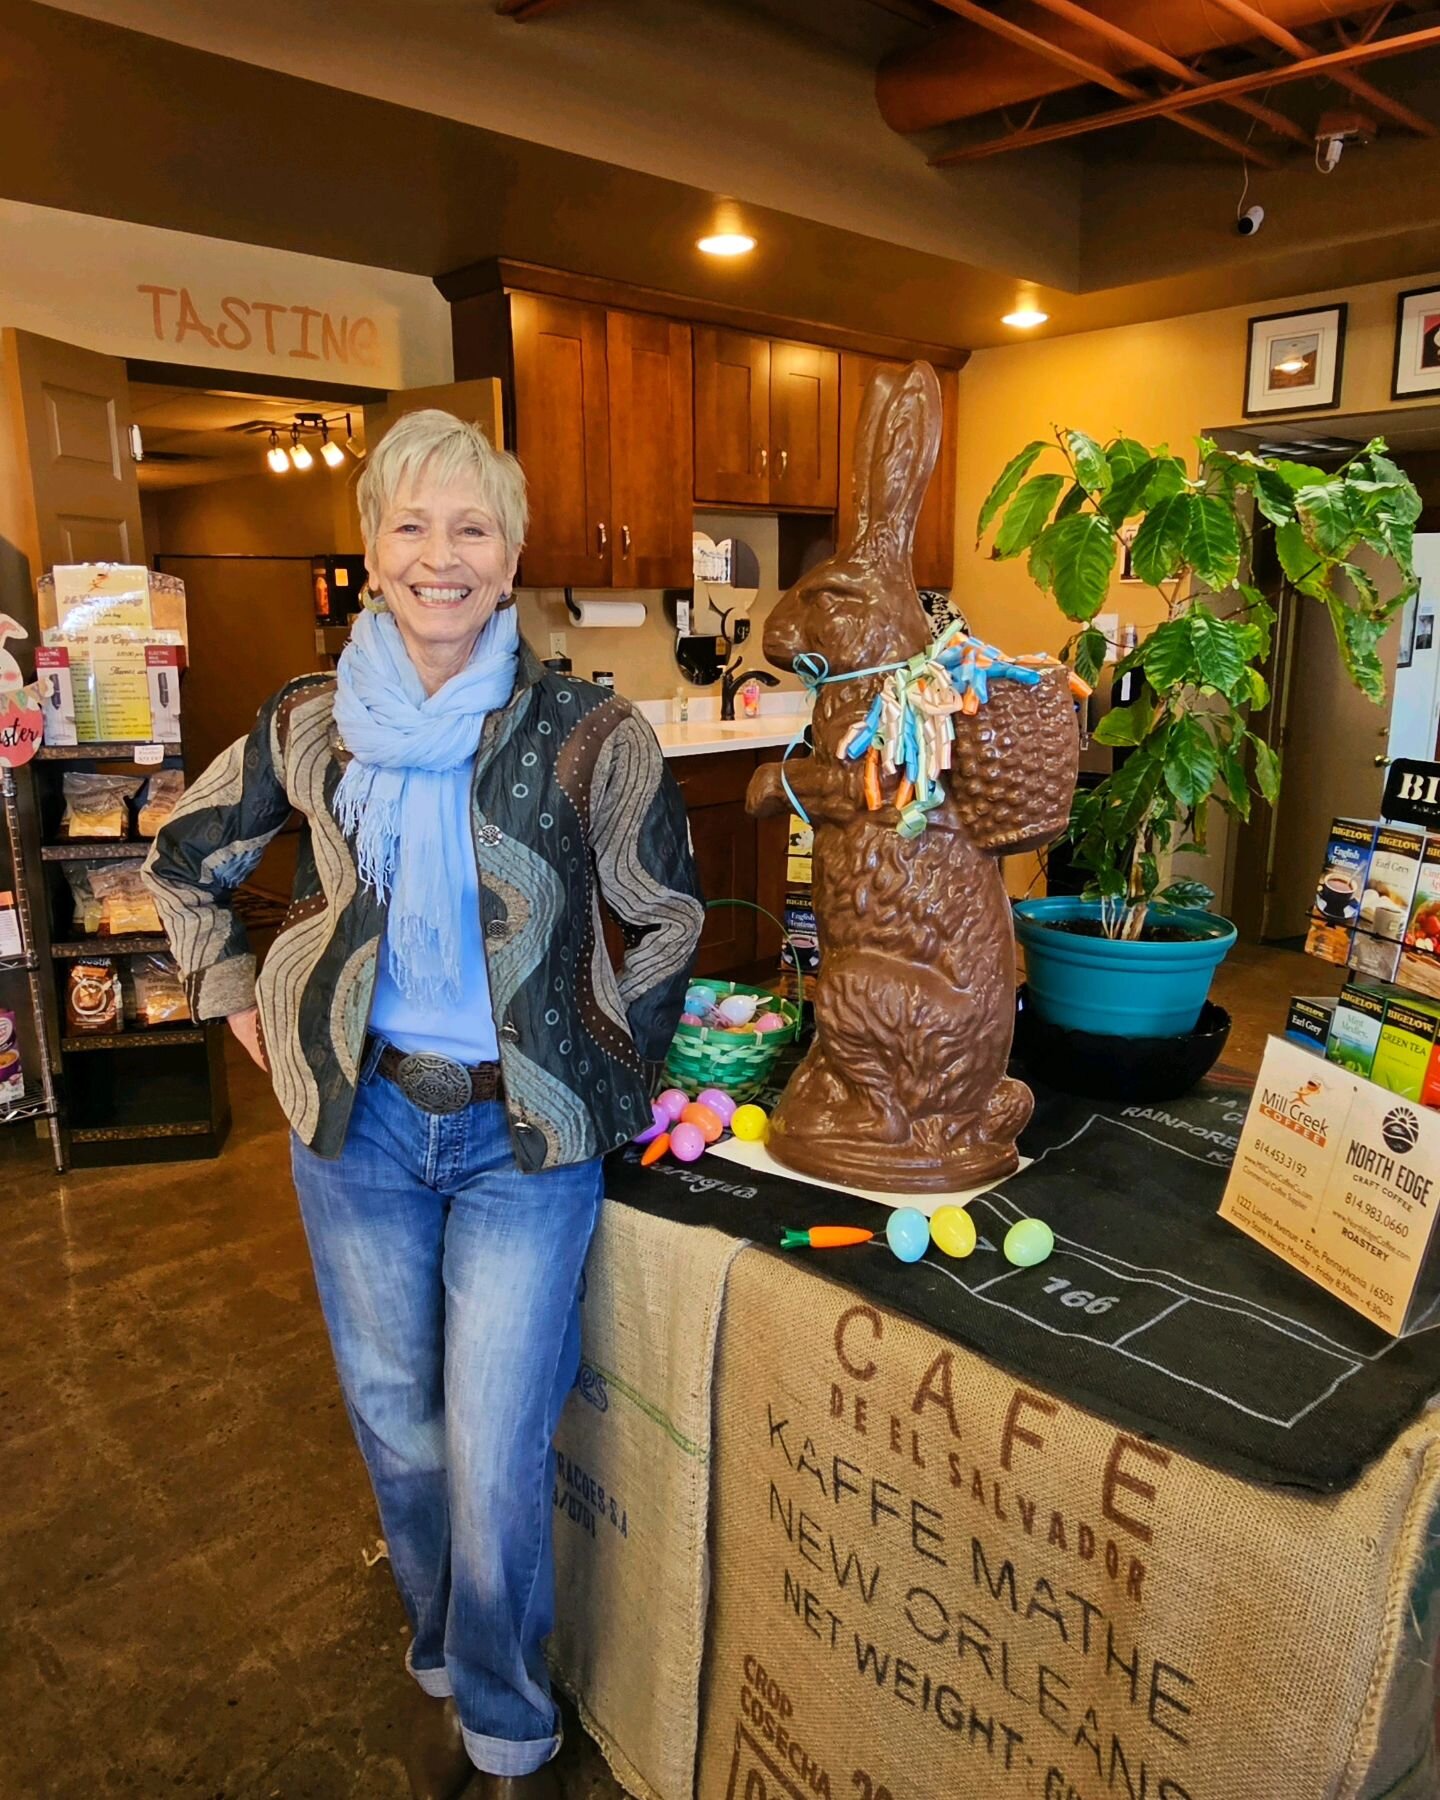 Hoppy Easter to all our coffee (and chocolate) loving friends 🐰🍫☕️

Thank you @pulakoschocolates for creating this incredible 31lb chocolate bunny!

#eastercoffee #chocolatebunny #eriechocolate #eriecoffee #millcreekcoffee #northedgecoffee